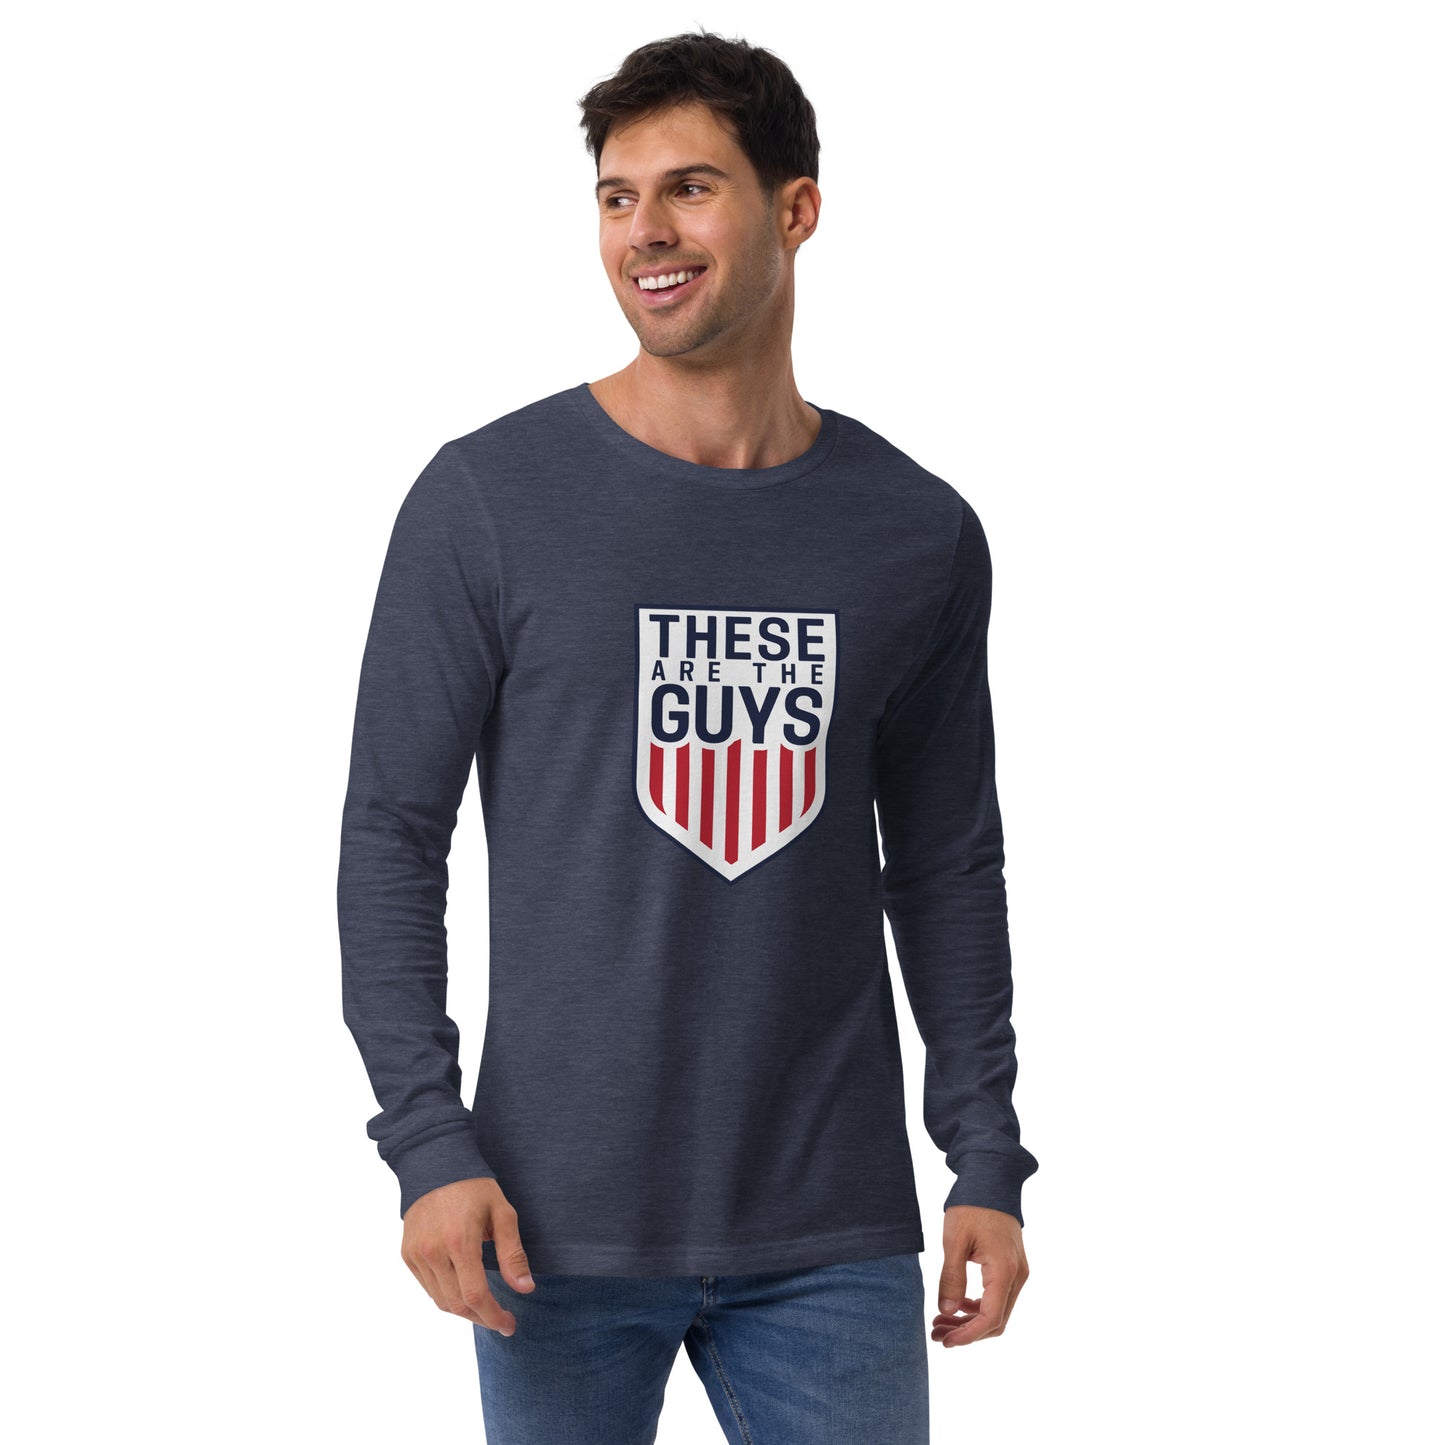 These are the Guys - Official Long-Sleeve T-Shirt